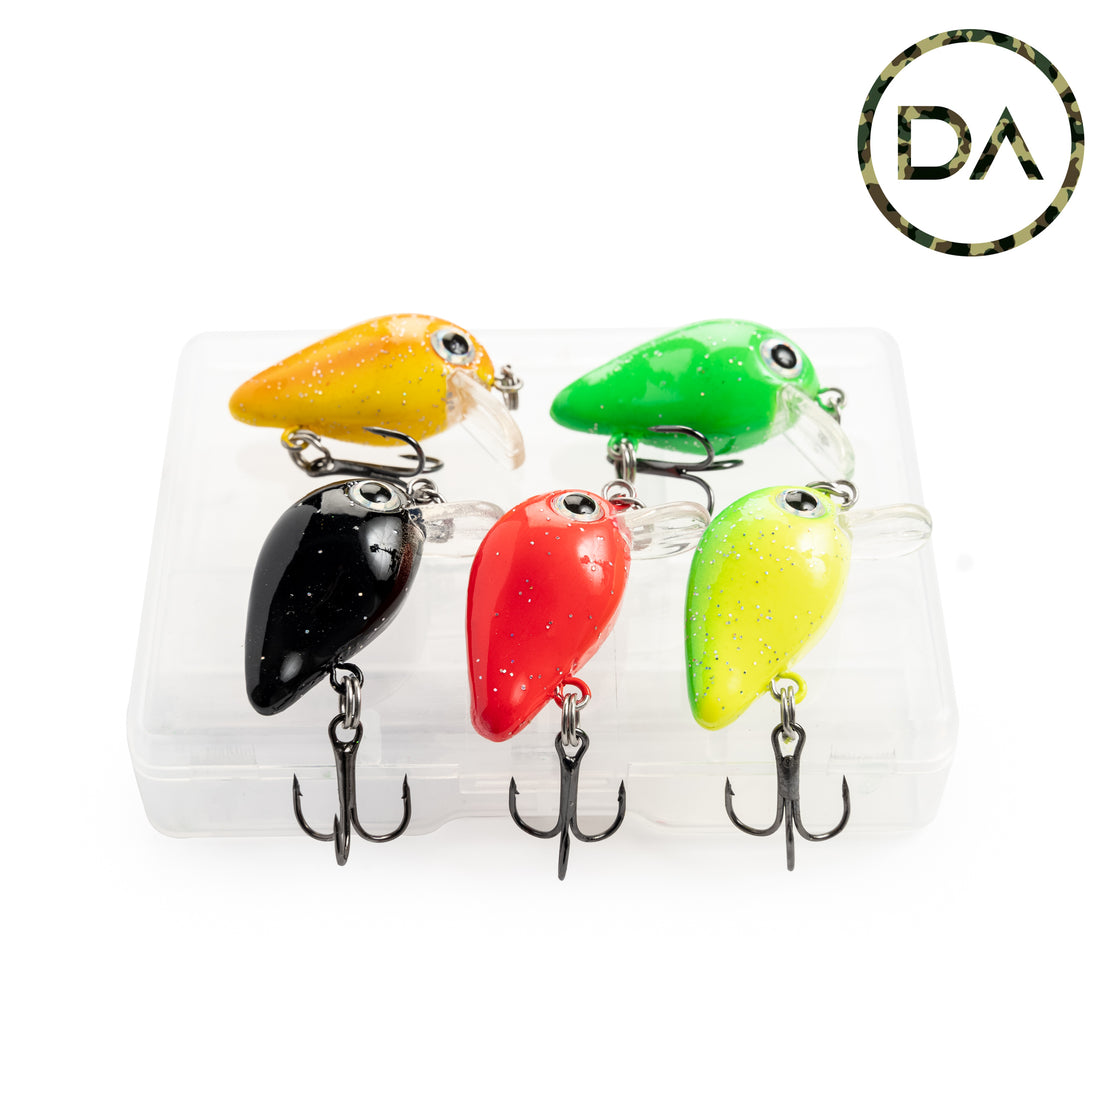 Micro Neo Mixed Crankbait Floating Lure (28mm) - 5 Pack - Decoy Angling